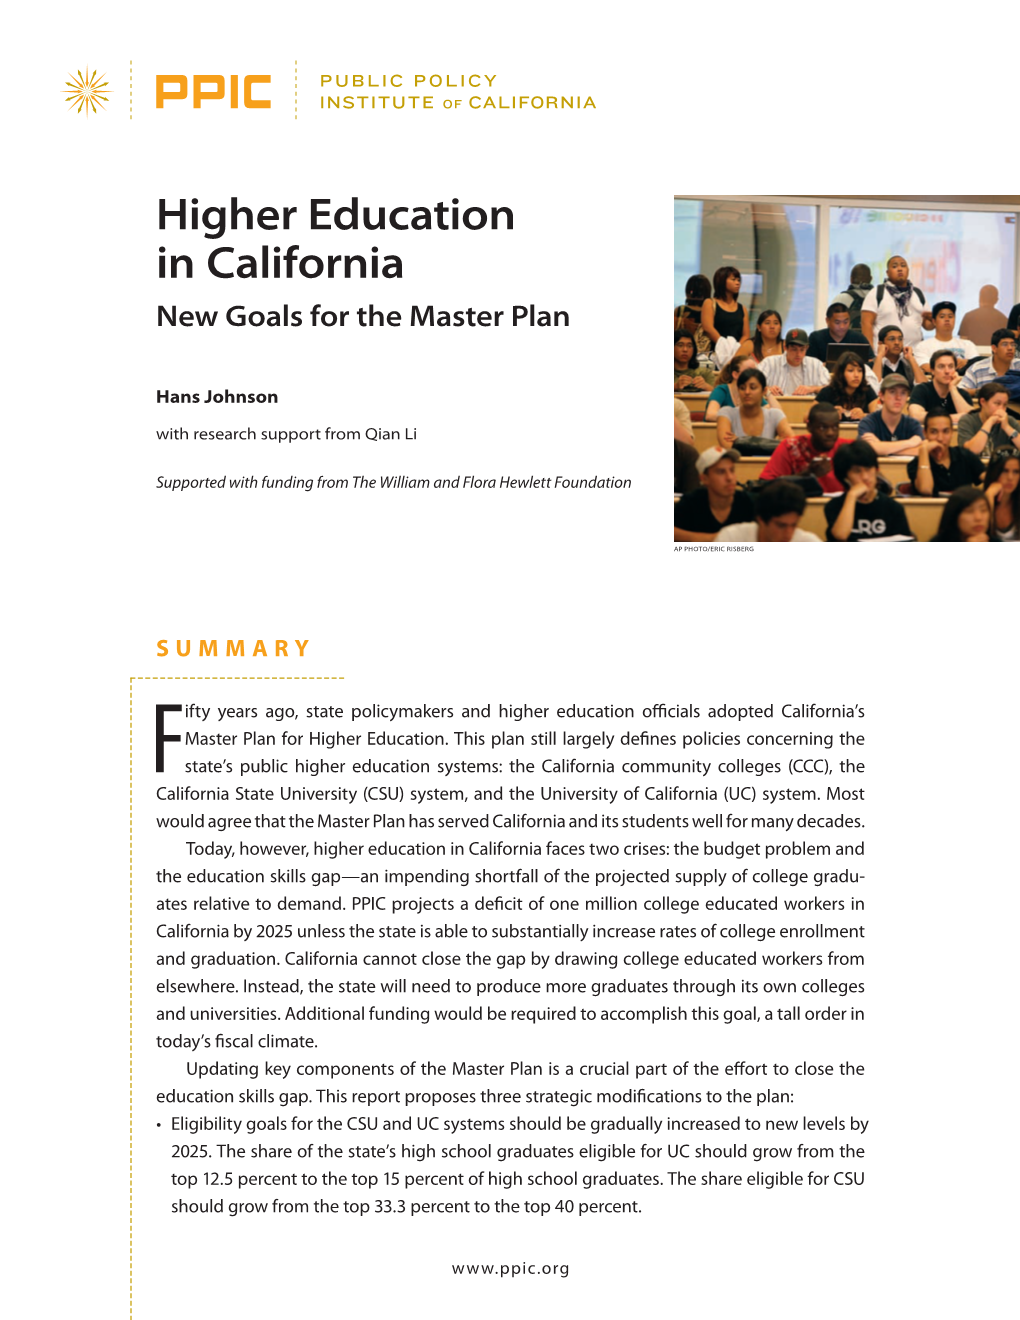 Higher Education in California: New Goals for the Master Plan